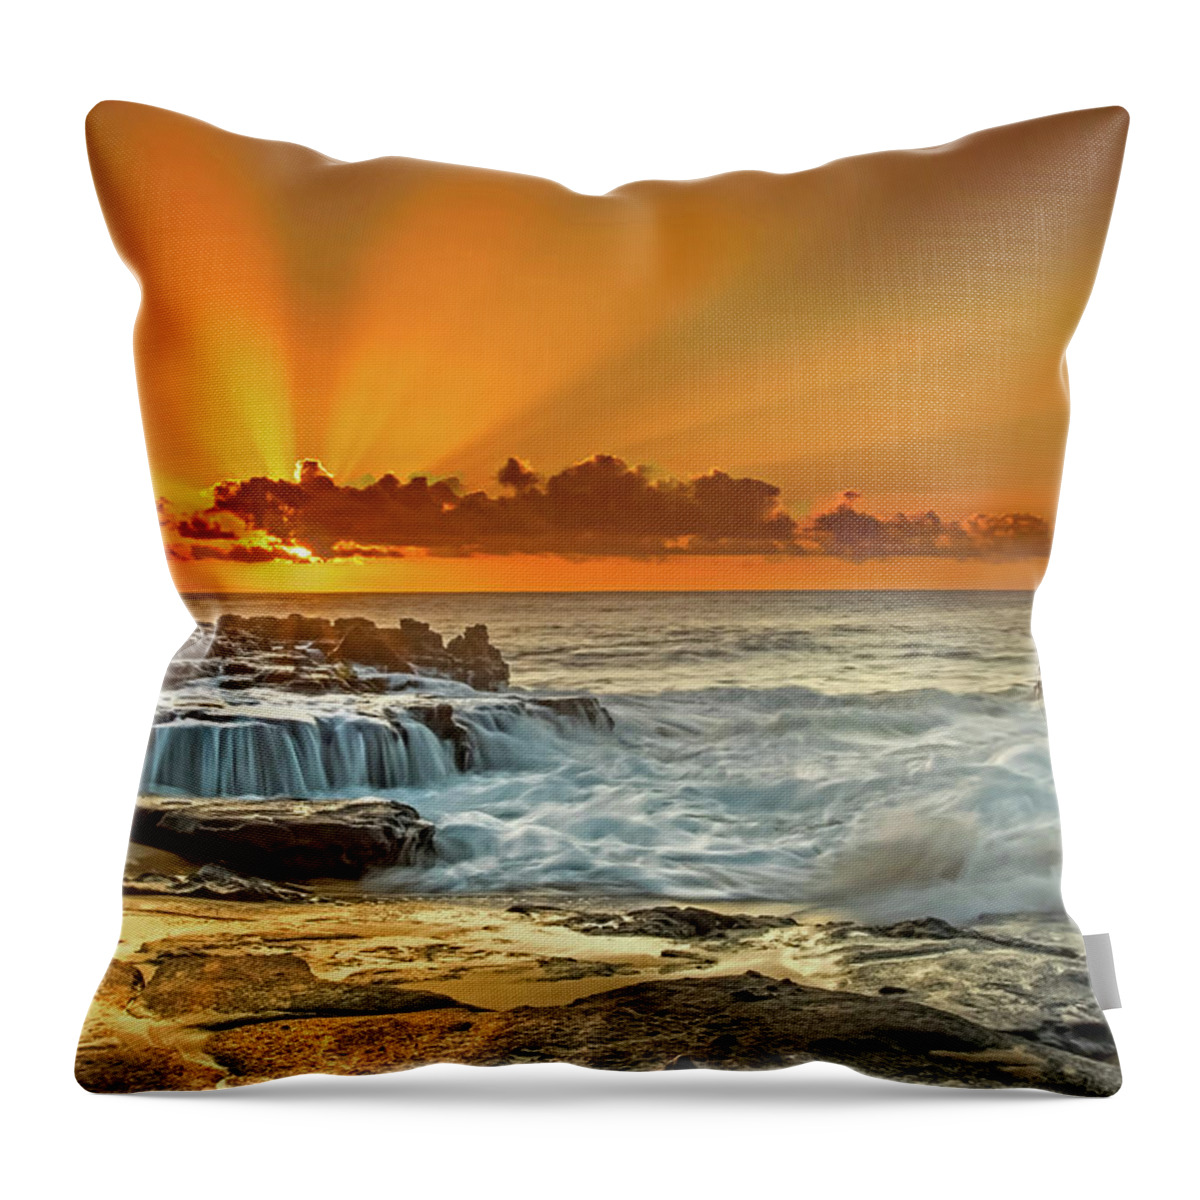 Oahu Sunset Ocean Shorebreak Seascape Clouds Fine Art Photography Throw Pillow featuring the photograph Golden Rays by James Roemmling